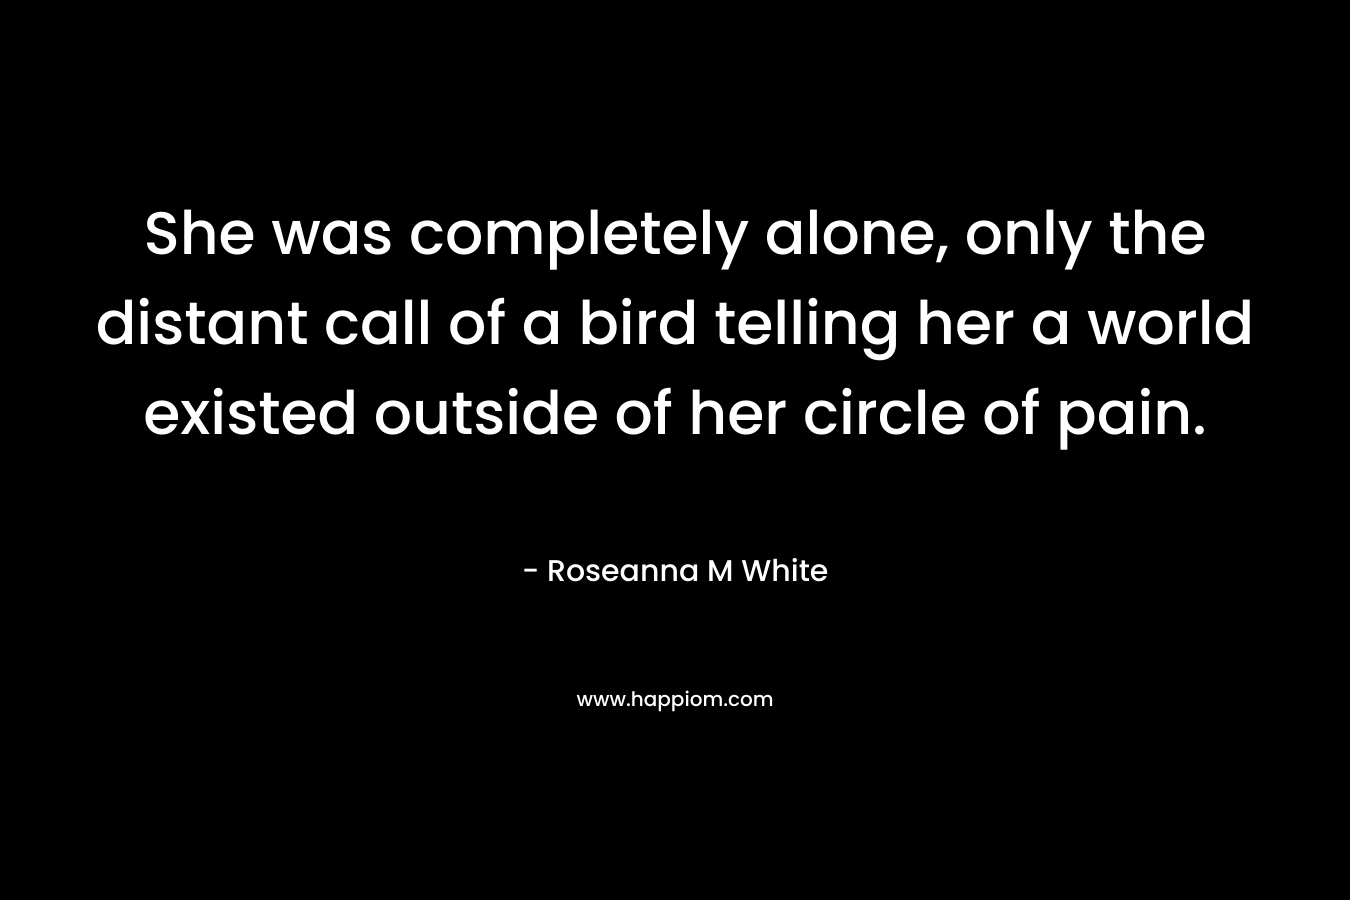 She was completely alone, only the distant call of a bird telling her a world existed outside of her circle of pain. – Roseanna M White